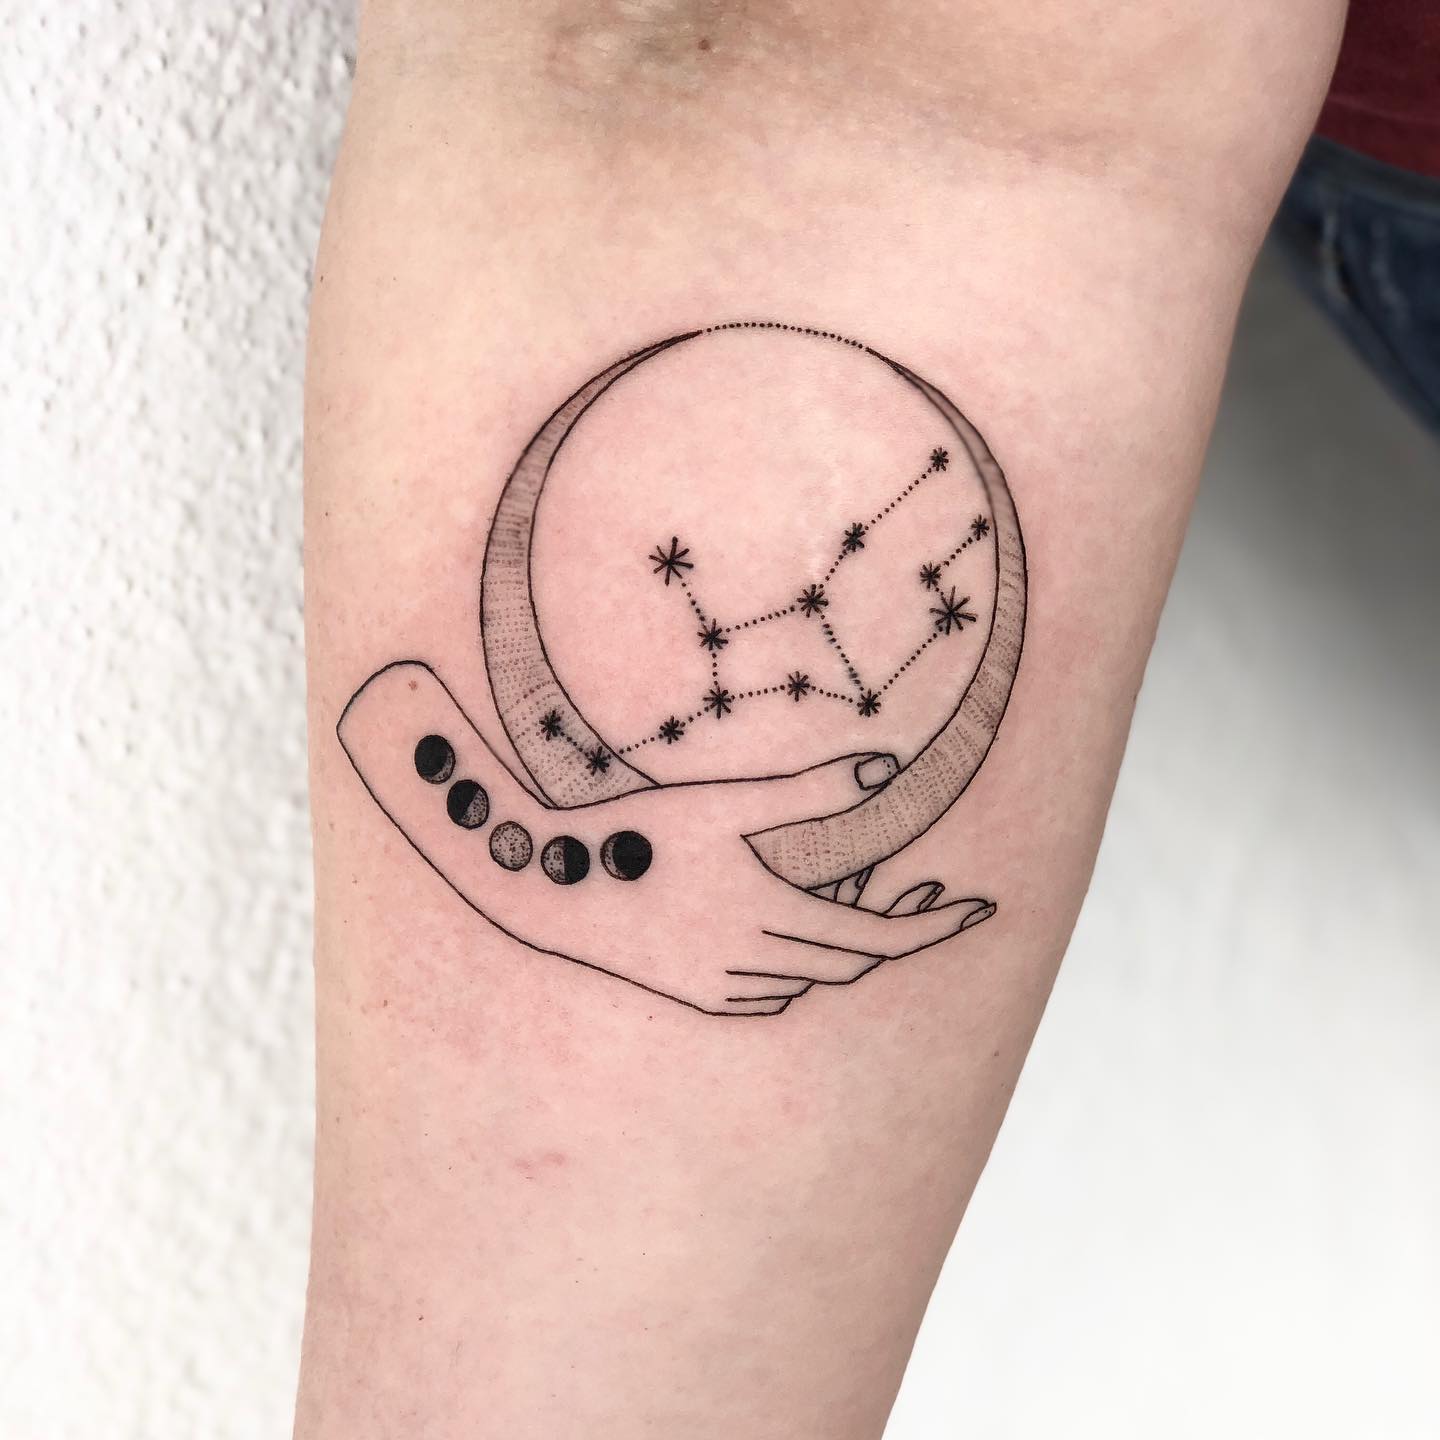 Moon phases and Virgo constellation tattoo on the inner forearm